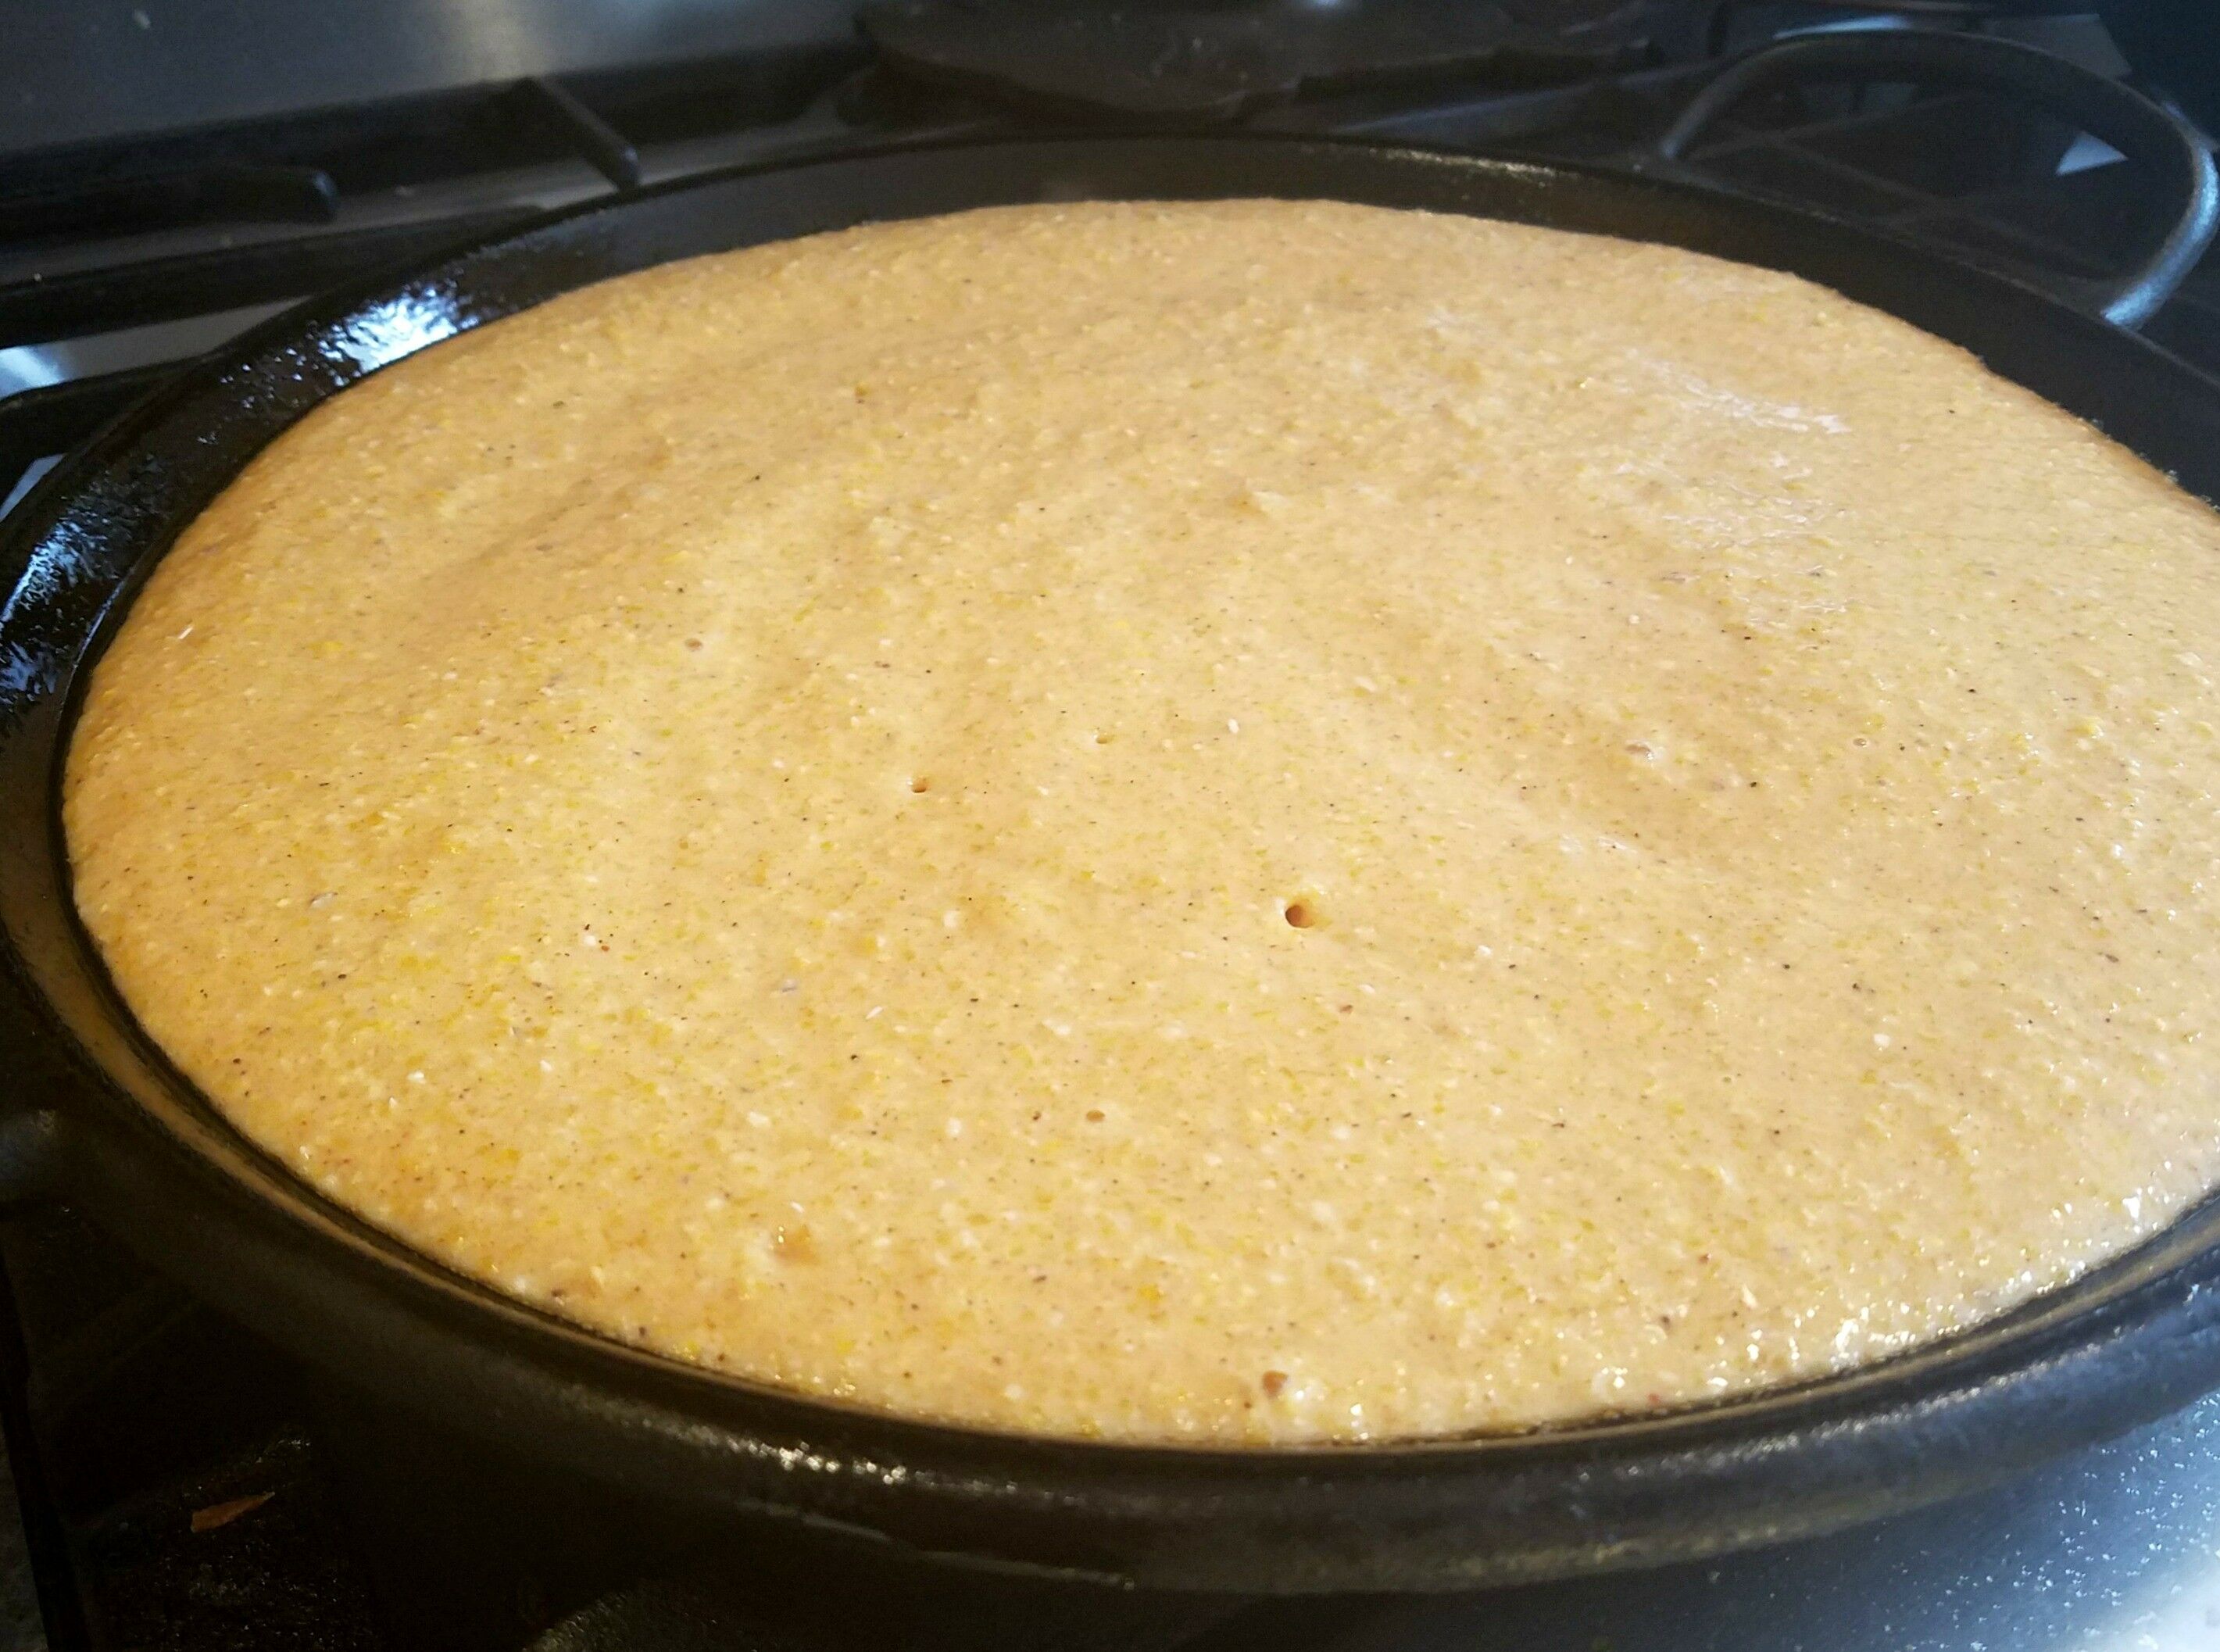 Cornmeal pizza crust poured and cooking on hot griddle.